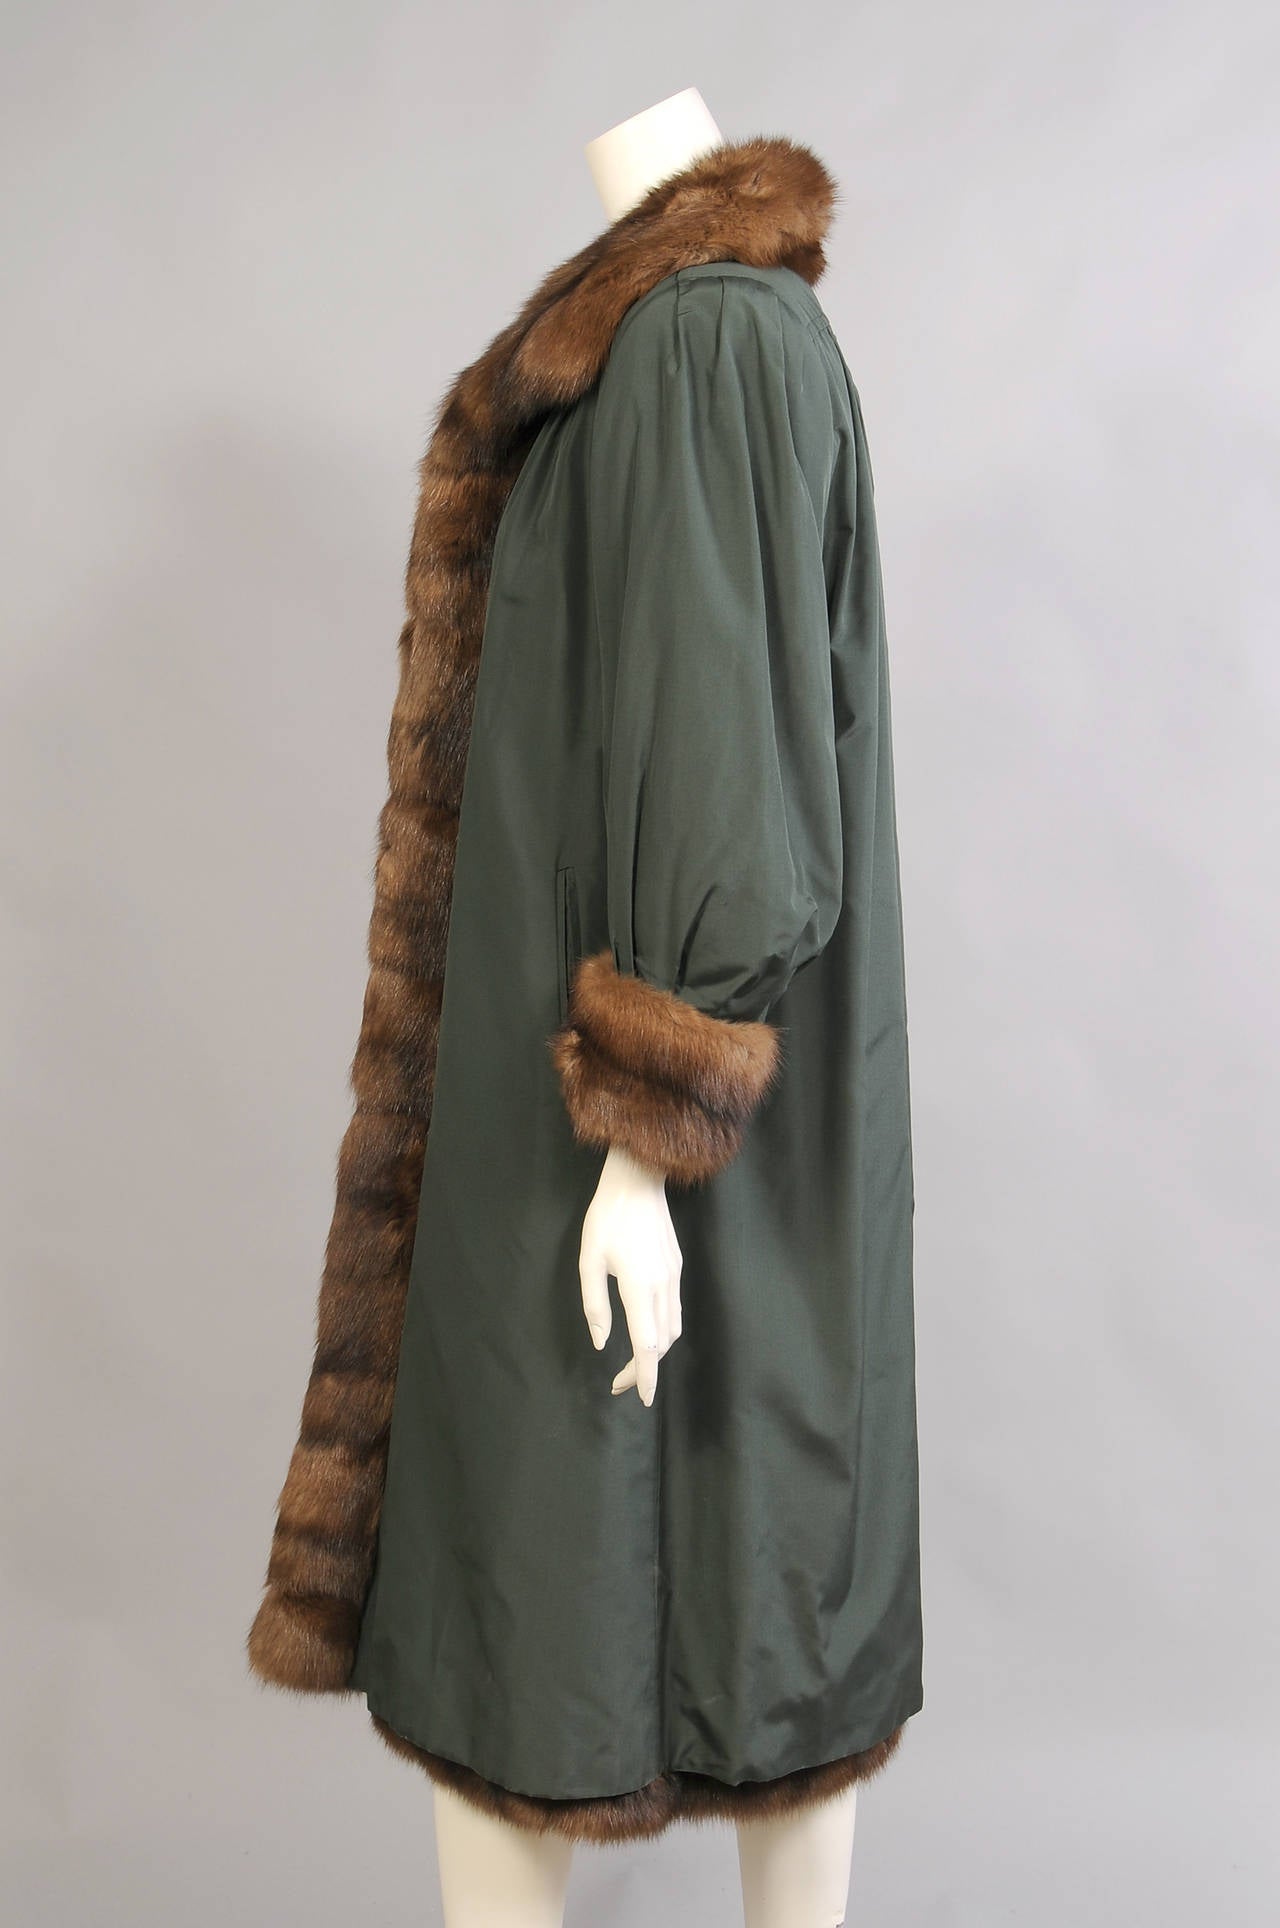 A deep green all weather coat is lined with luxurious light weight Russian sable. The coat has a lovely stand up collar and deep sable cuffs. There are fur hooks at the center front and the coat has two pockets. It is in excellent